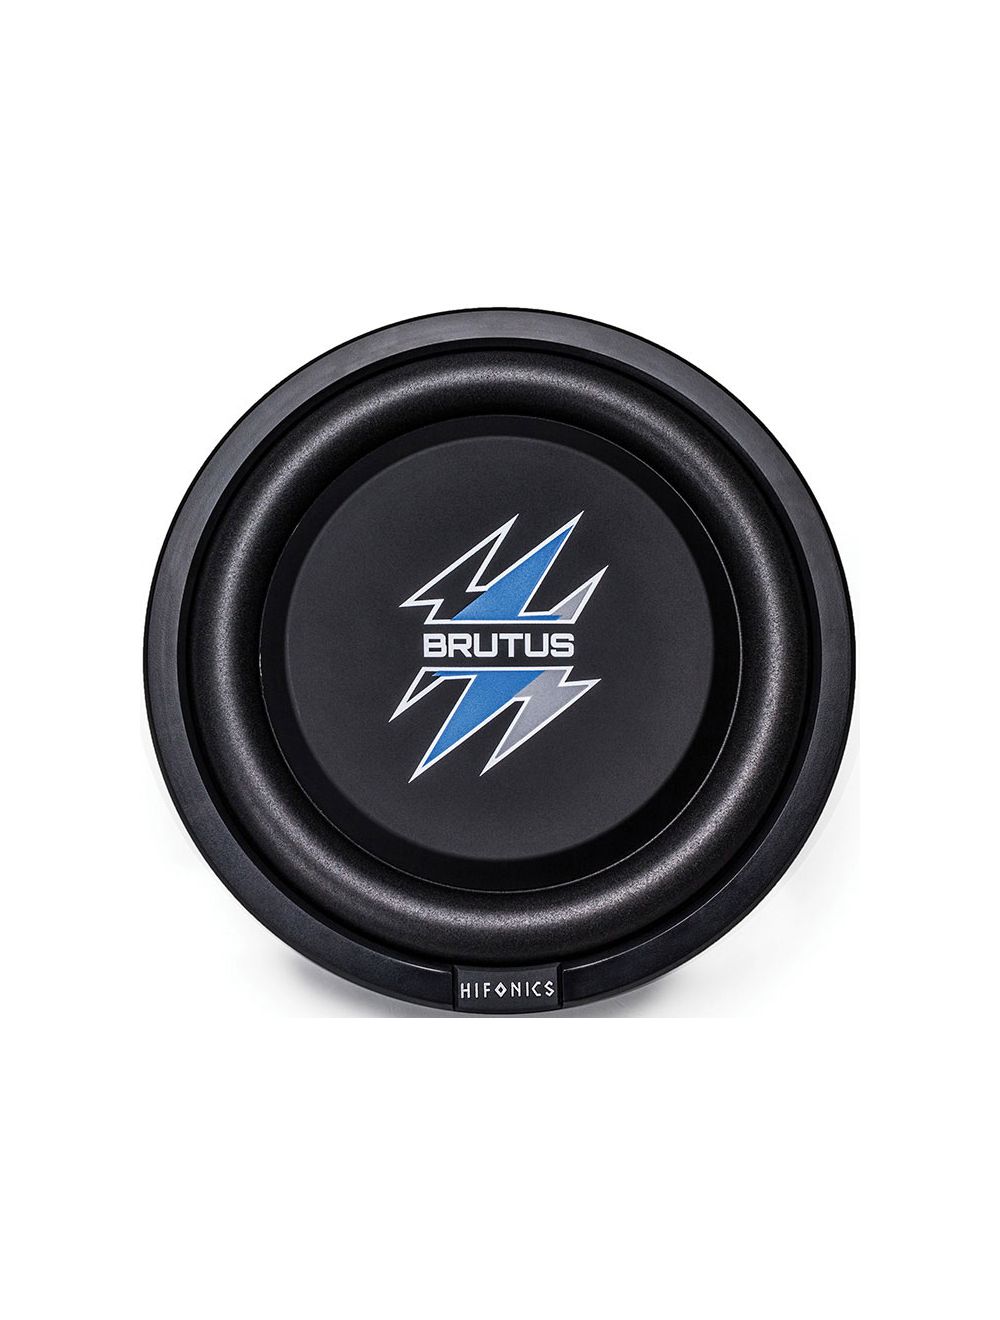 Hifonics BXS10D4 10" Brutus Series Shallow Subwoofer With Poly Cone And 2" Voice